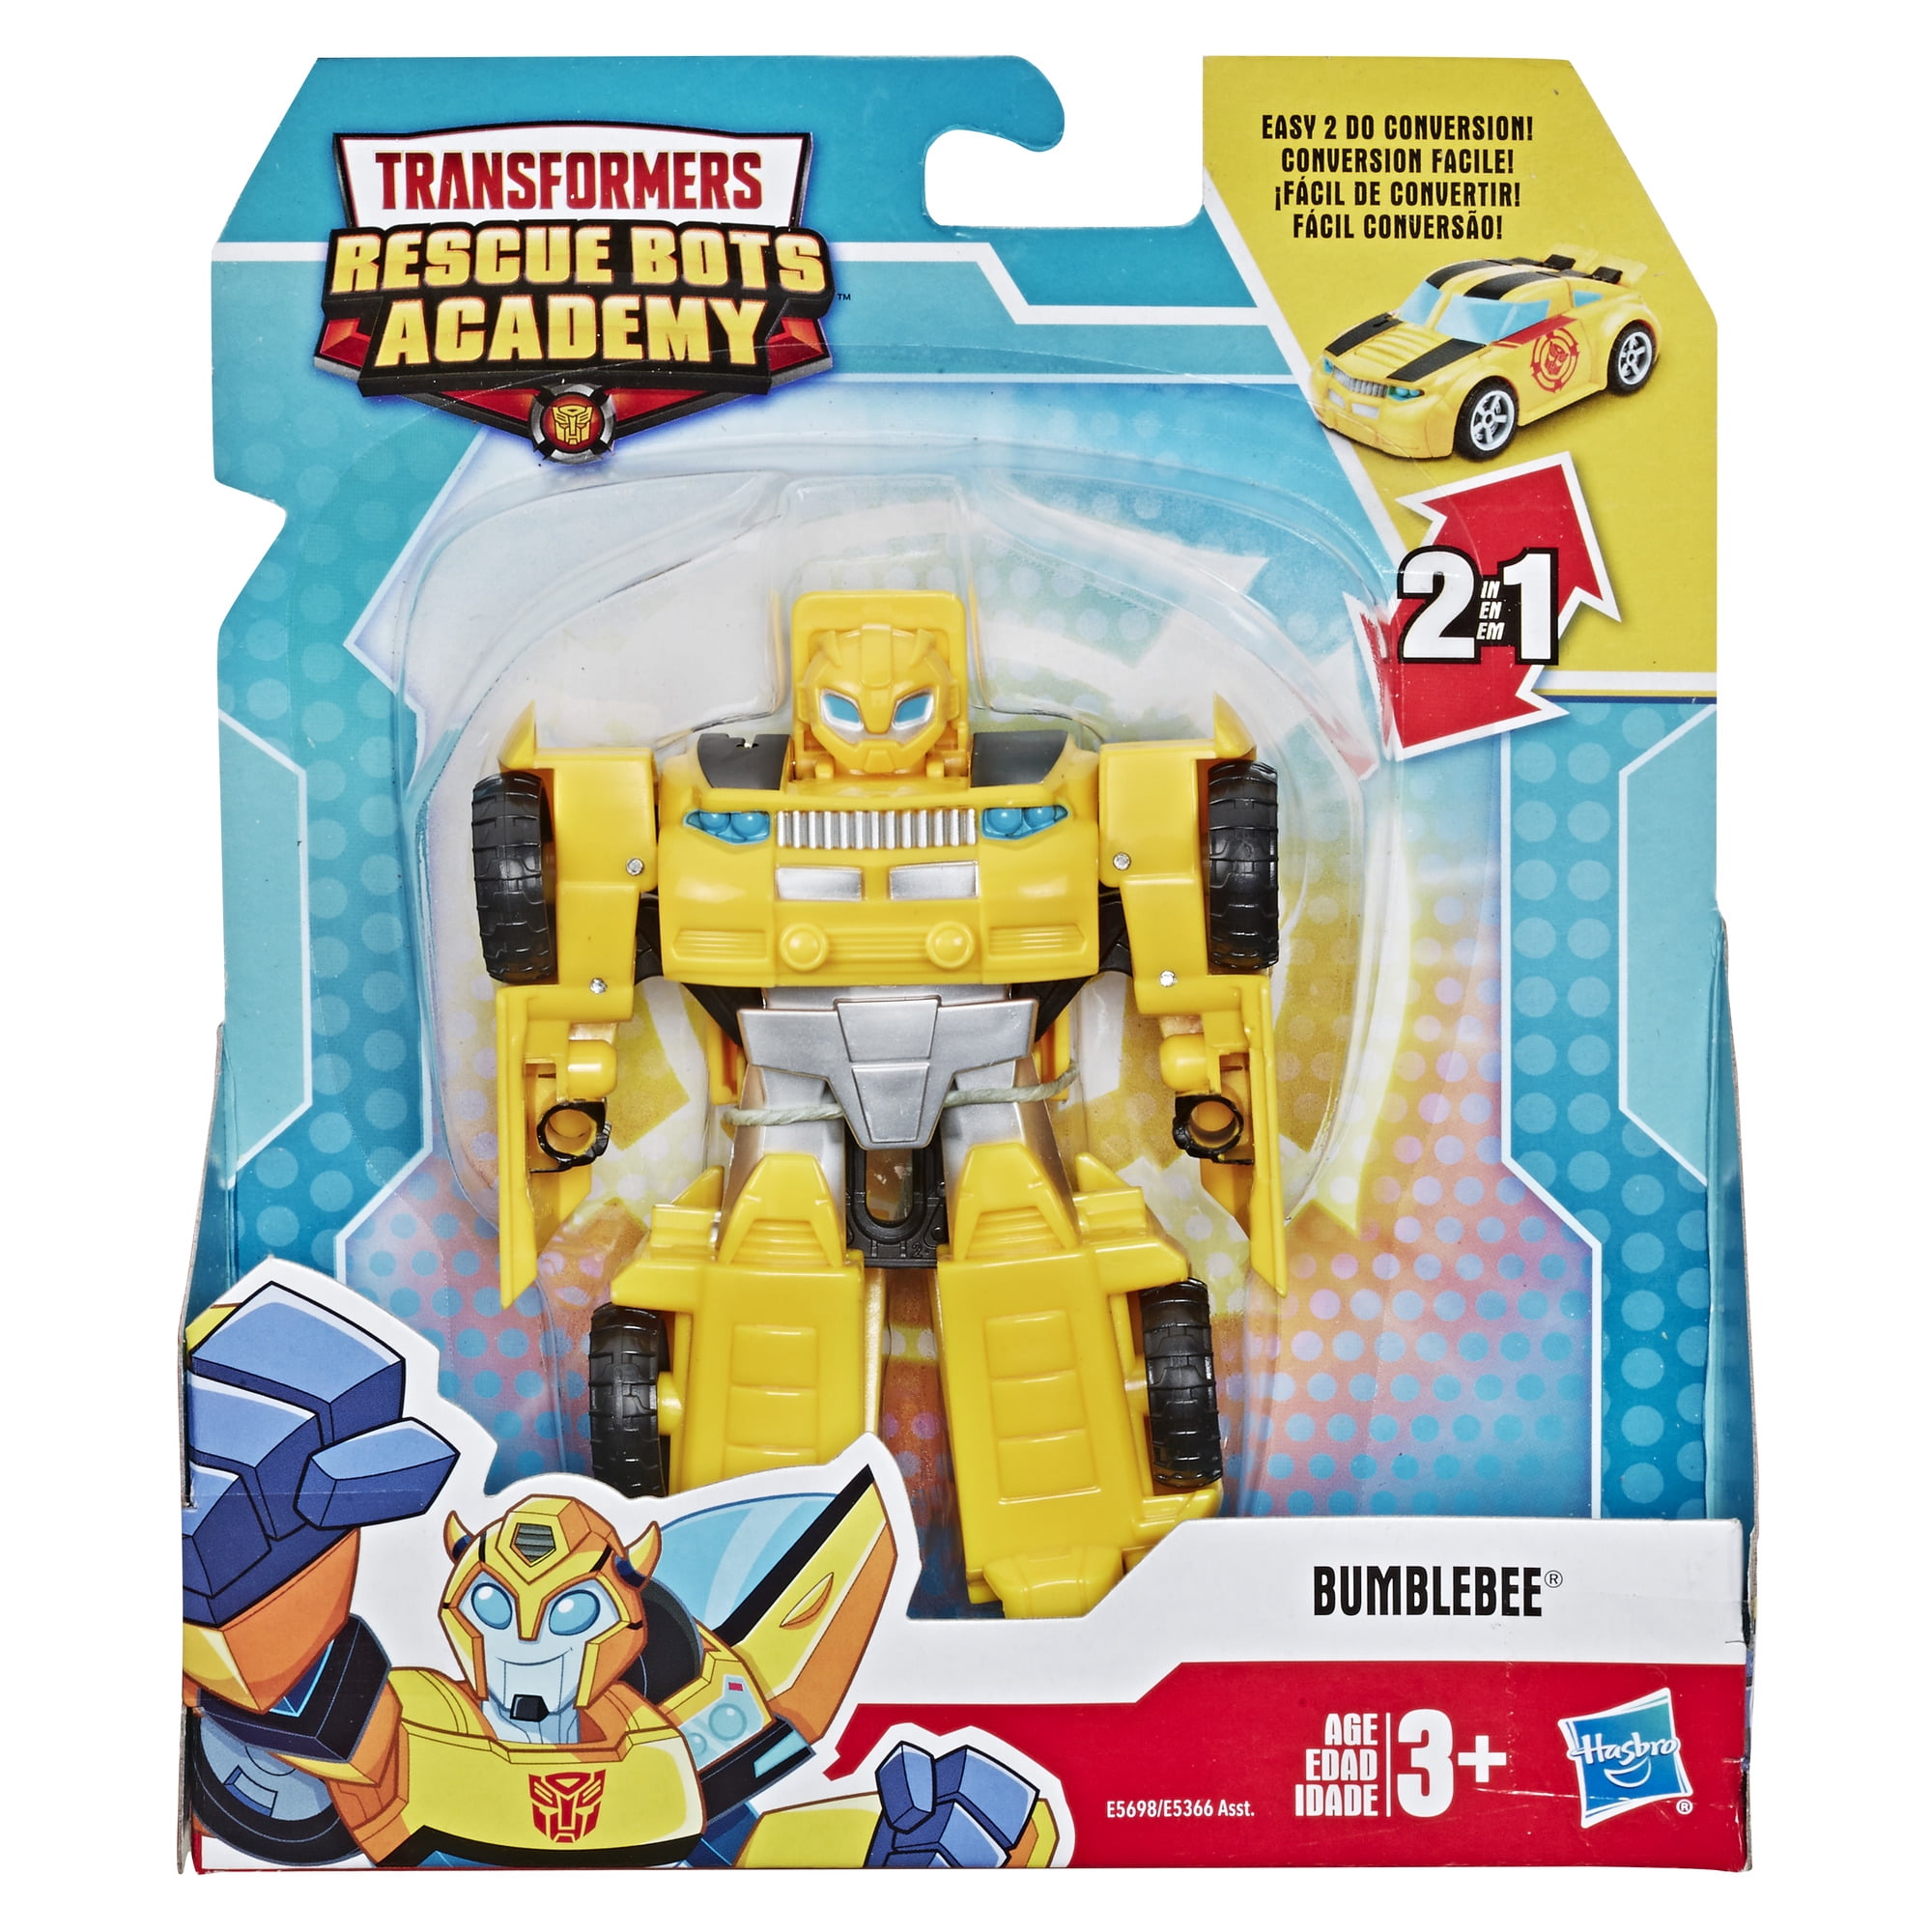 Bumblebee Action Figure for sale online Hasbro Transformers Playskool Rescue Bot 